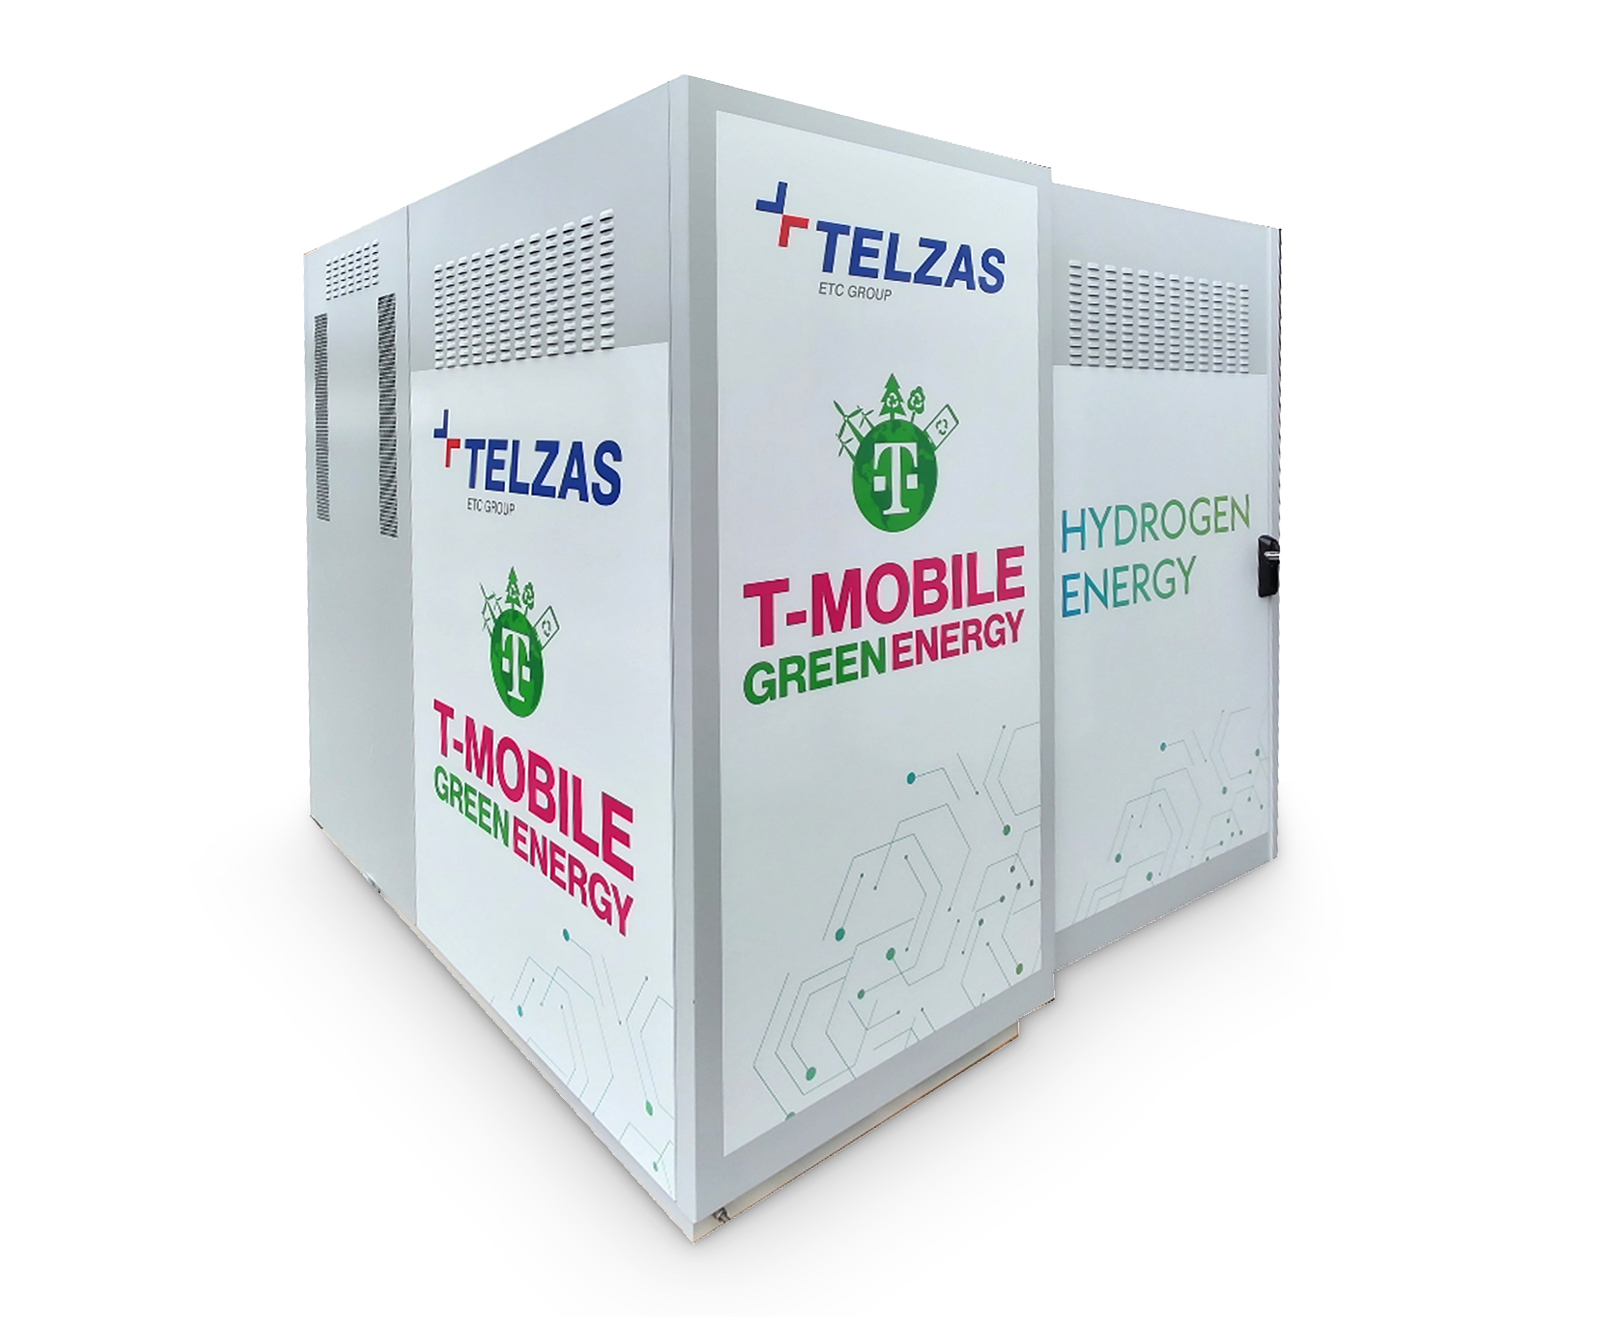 Telzas - hydrogen cell power system FC-01 in T-MOBILE